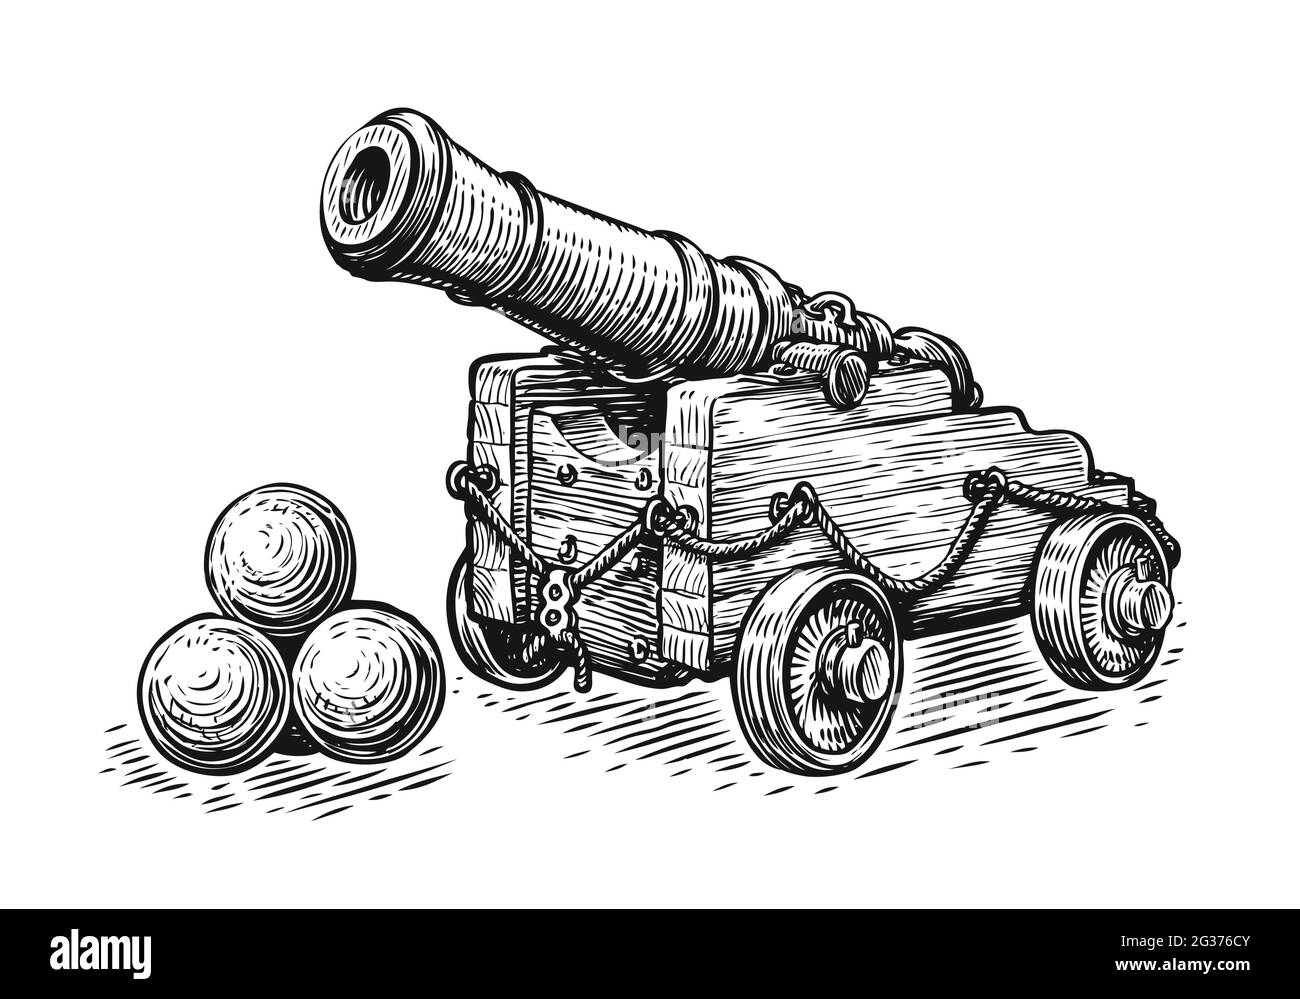 Old pirate ship cannon and cannonballs. Sketch vintage vector illustration Stock Vector